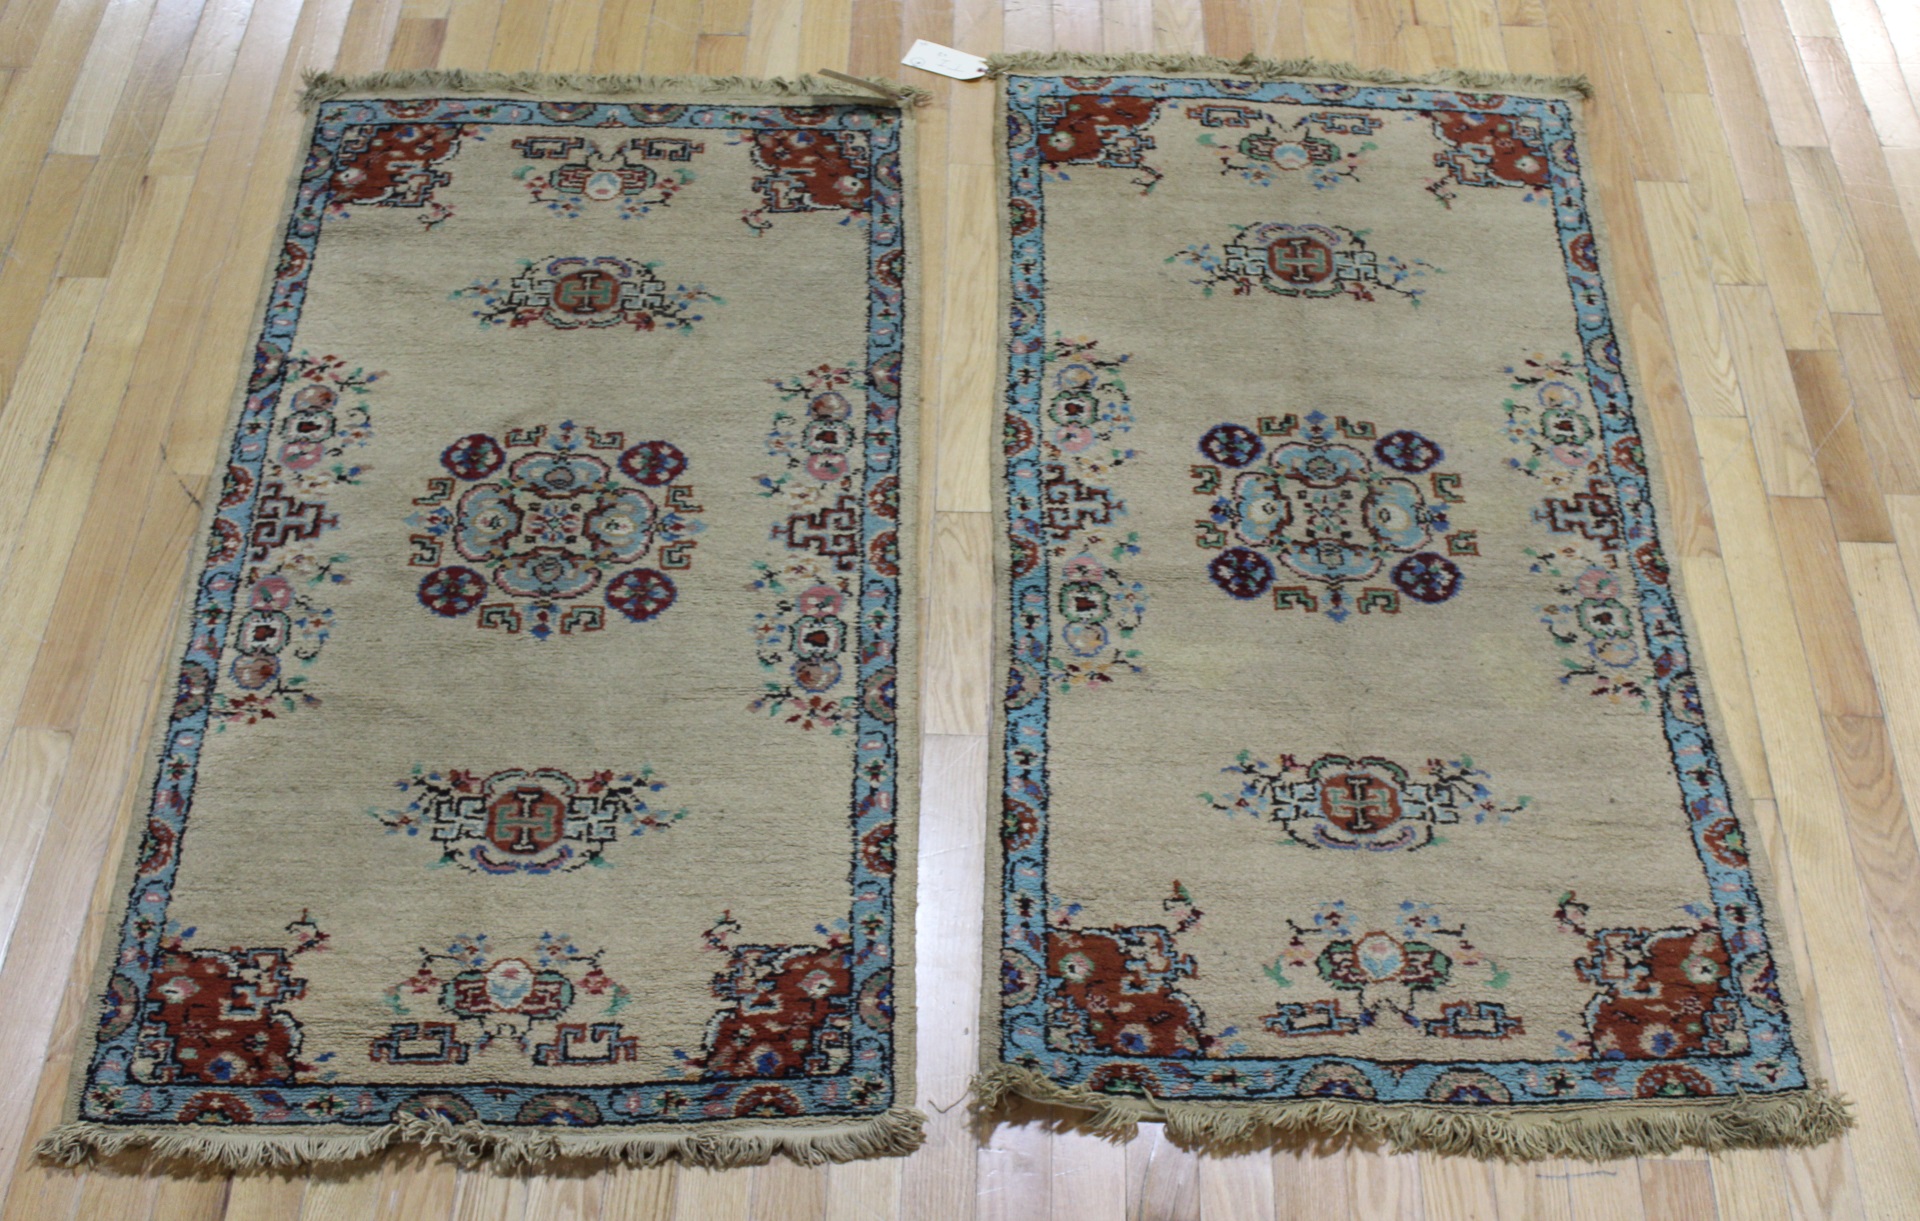 2 VINTAGE & FINELY HAND WOVEN AREA